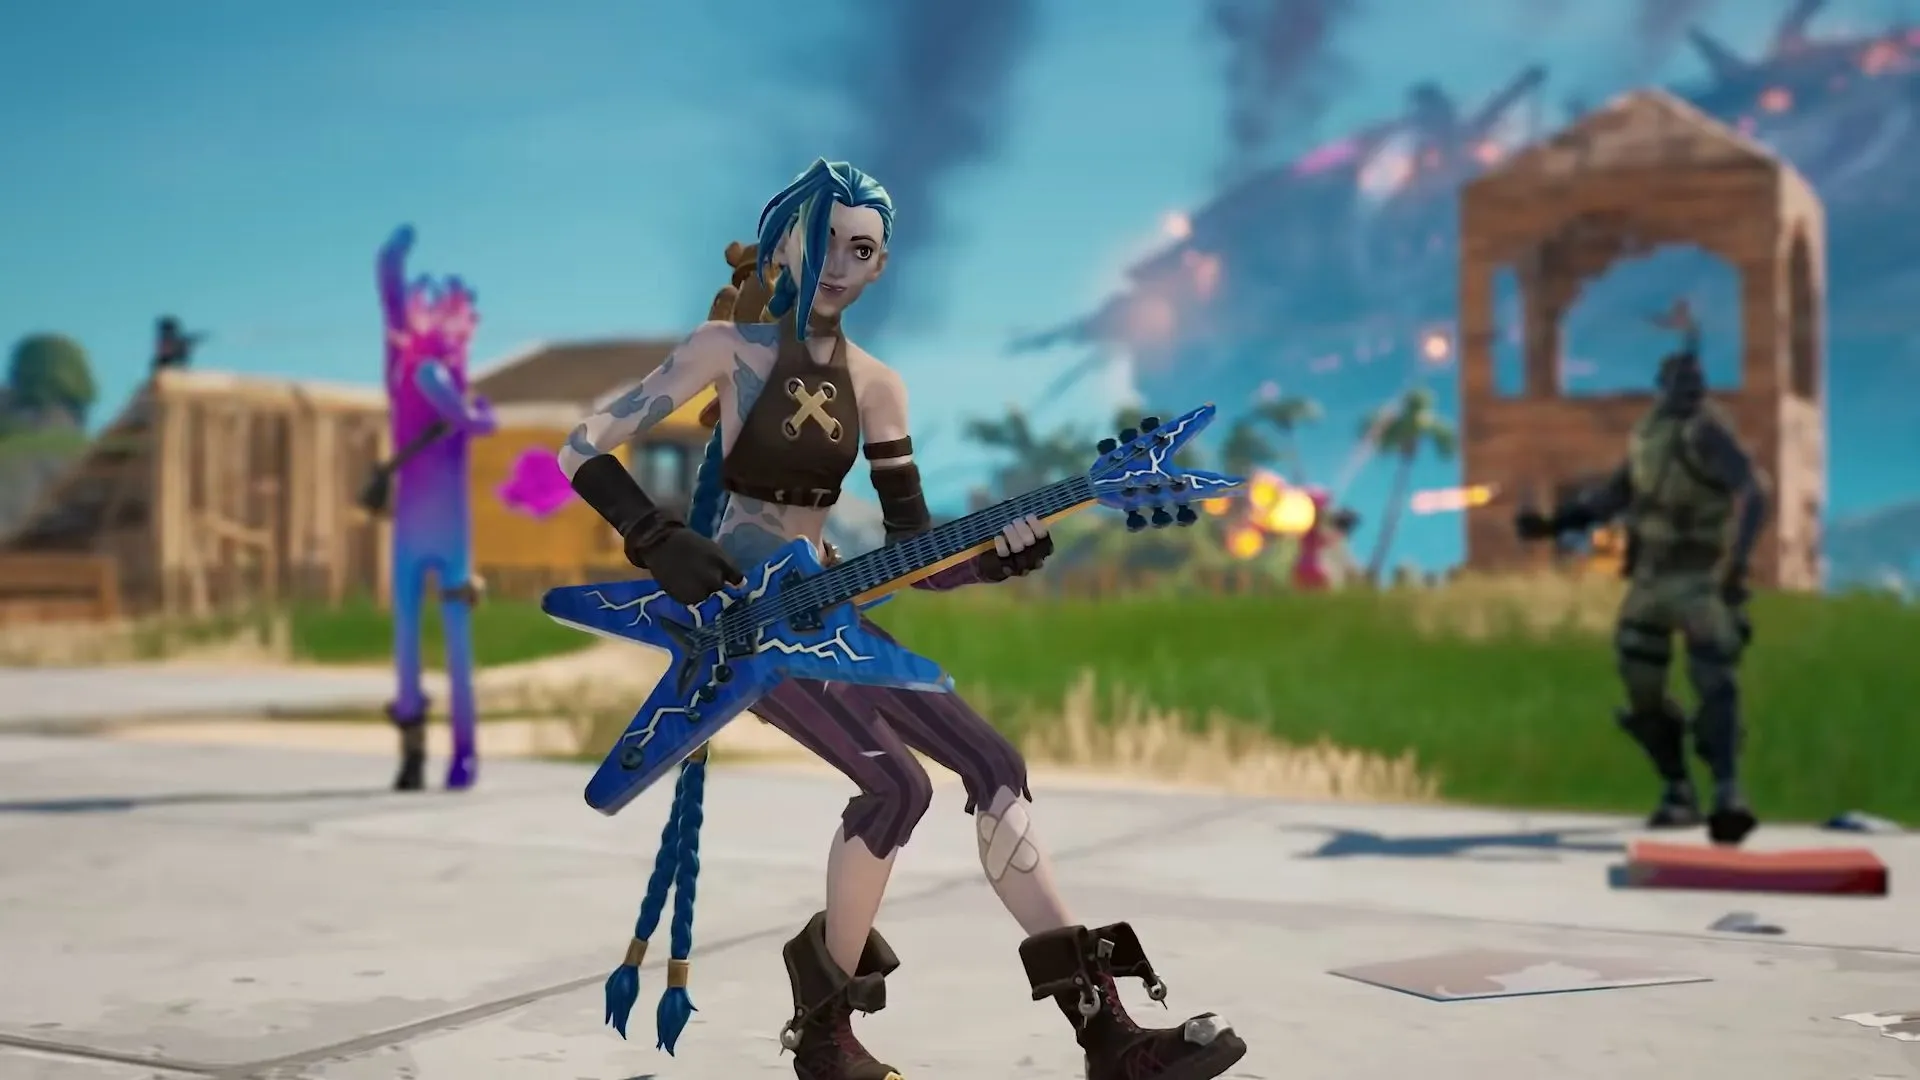 Fortnite meets League of Legends in a Jinx collab that actually fits